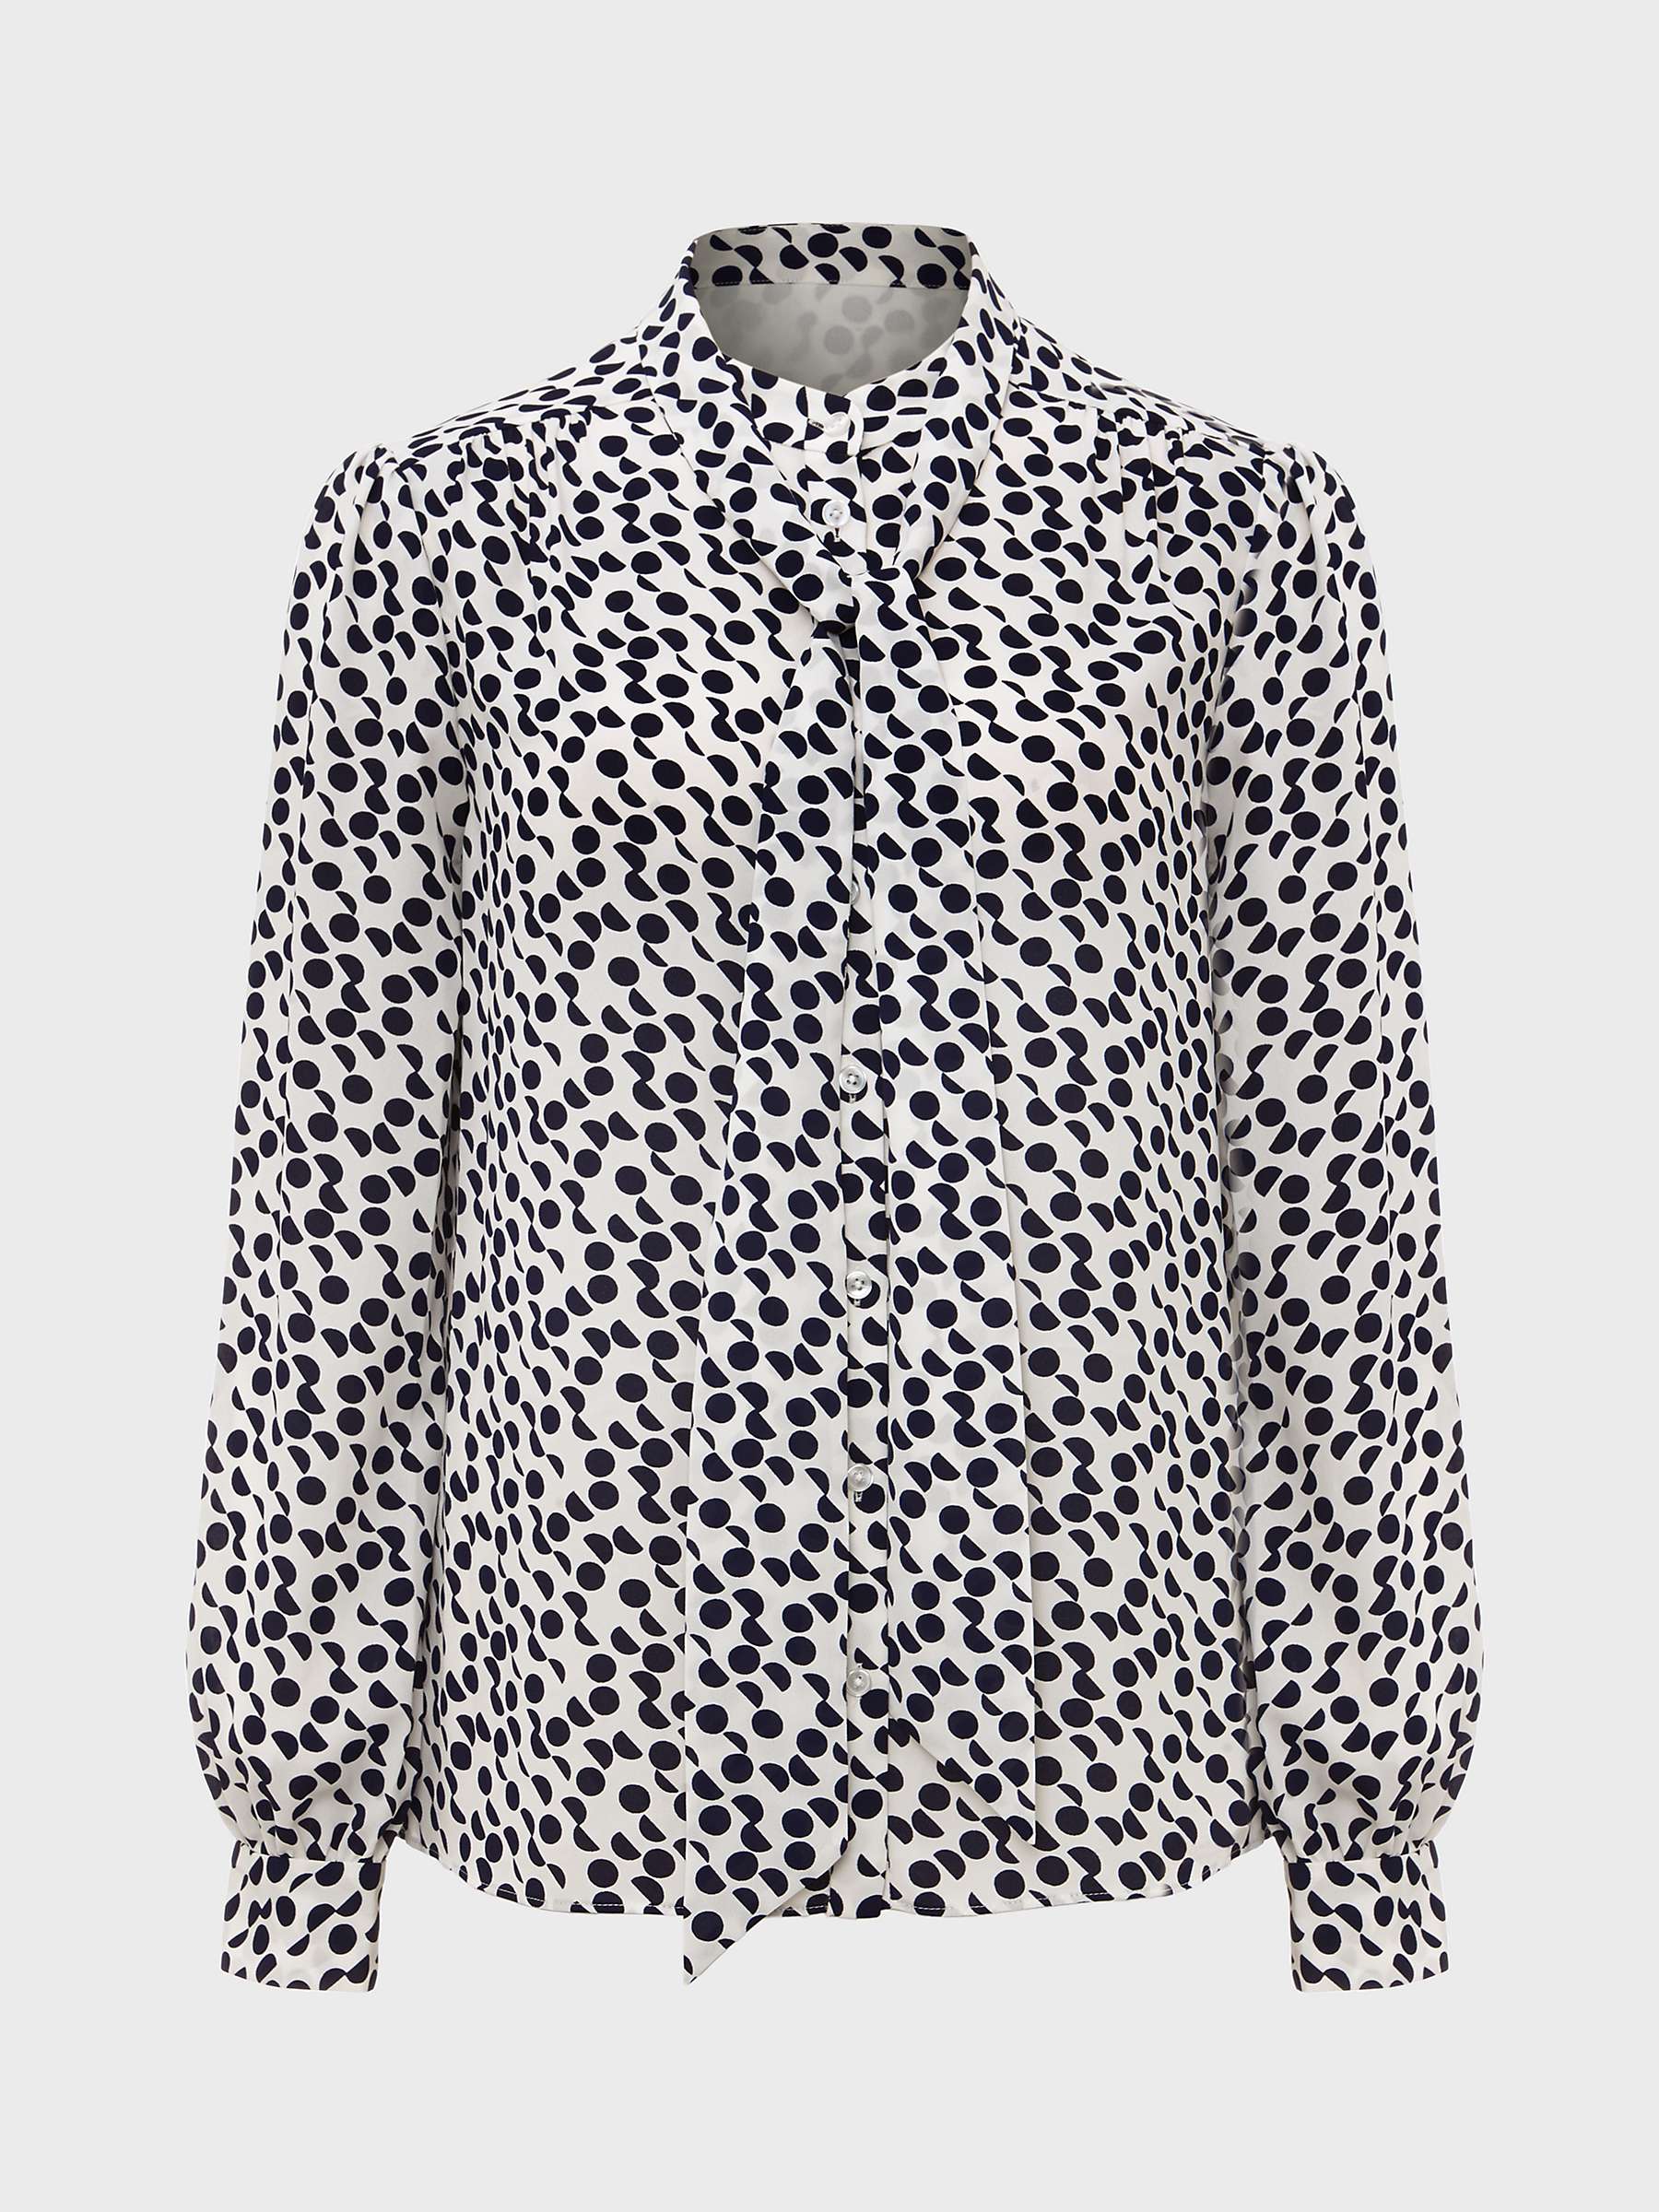 Buy Hobbs Dolly Blouse, Ivory/Navy Online at johnlewis.com